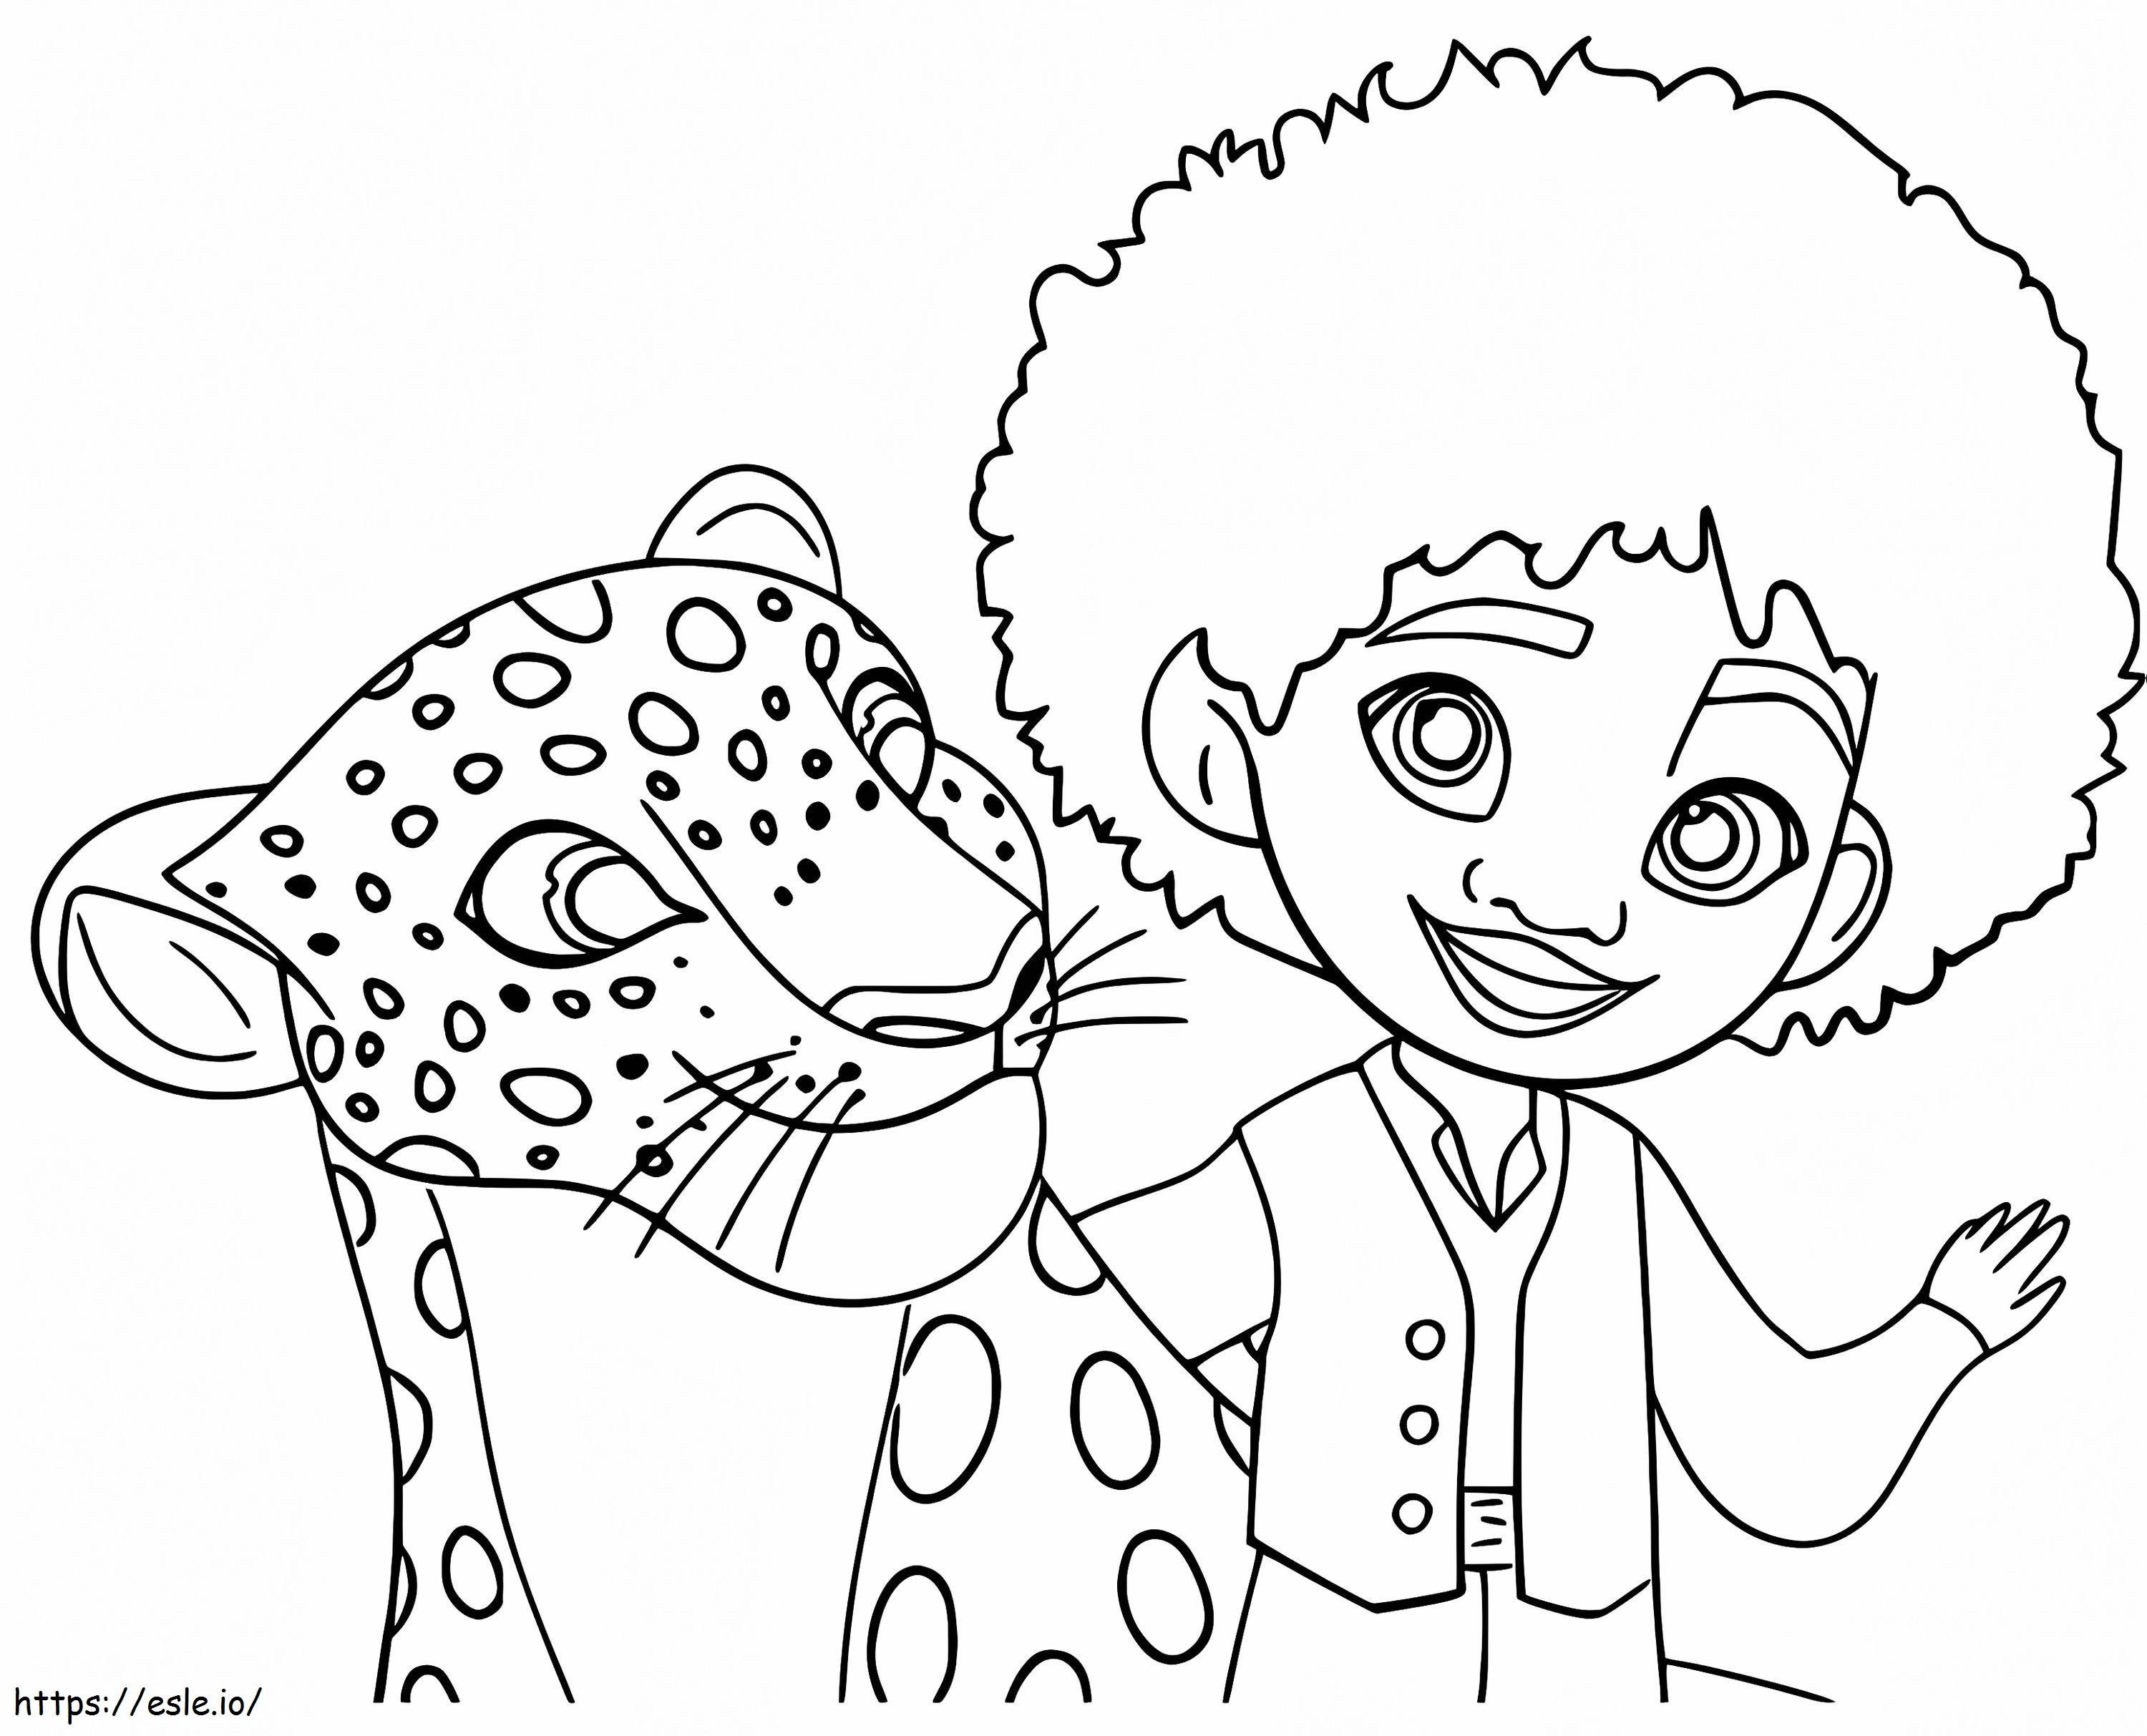 Antonio And The Jaguar coloring page